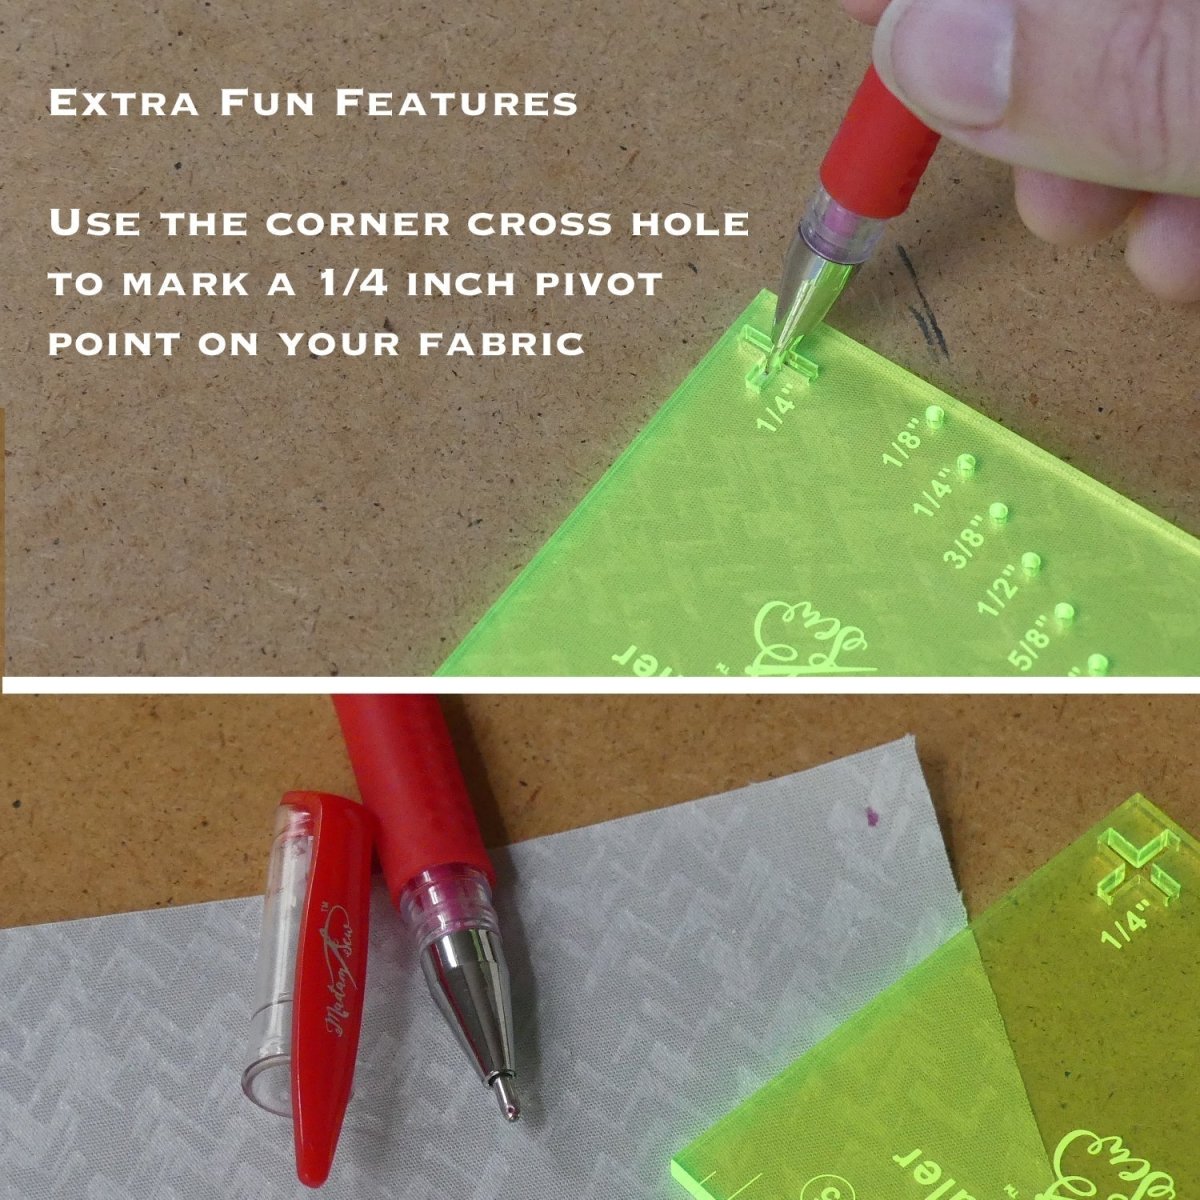 marking a 1/4 inch pivot on fabric with the seam guide ruler